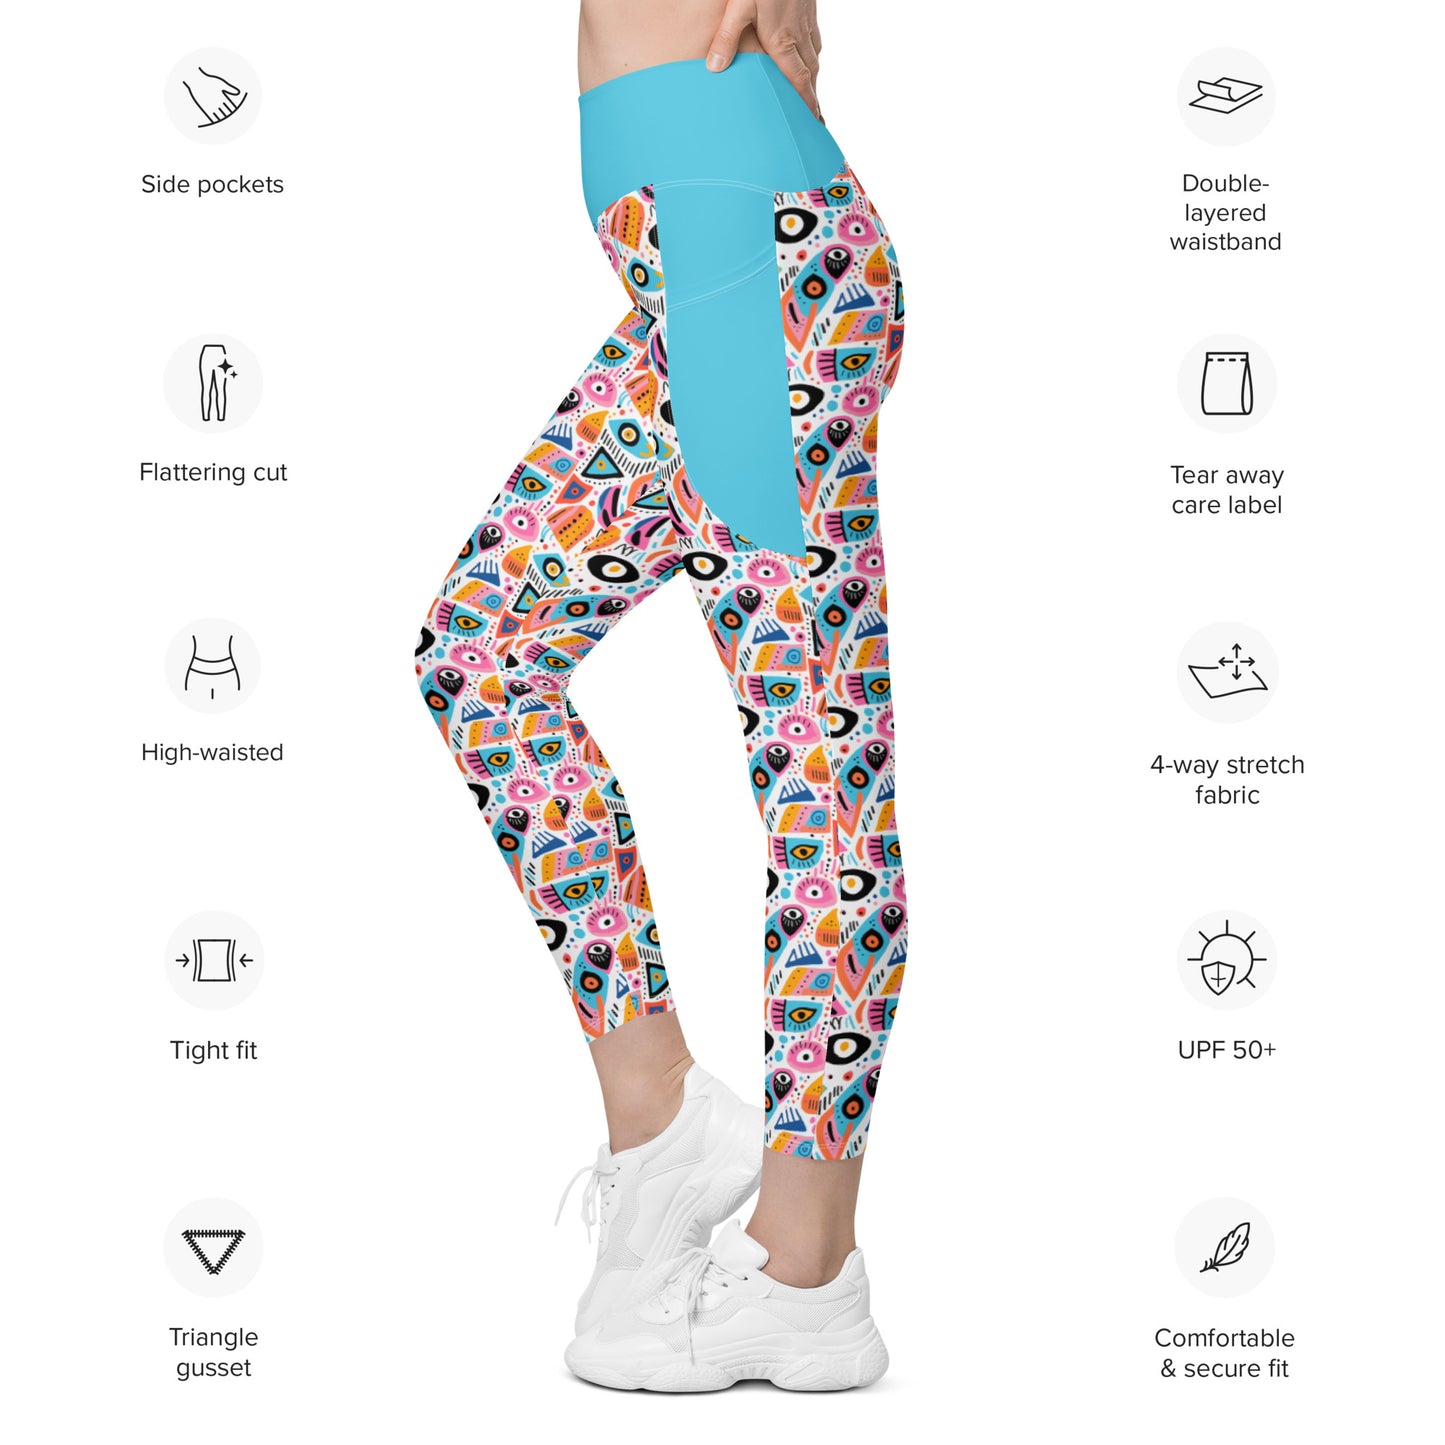 Malocchio High Waist 7/8 Recycled Yoga Leggings / Yoga Pants with Pockets